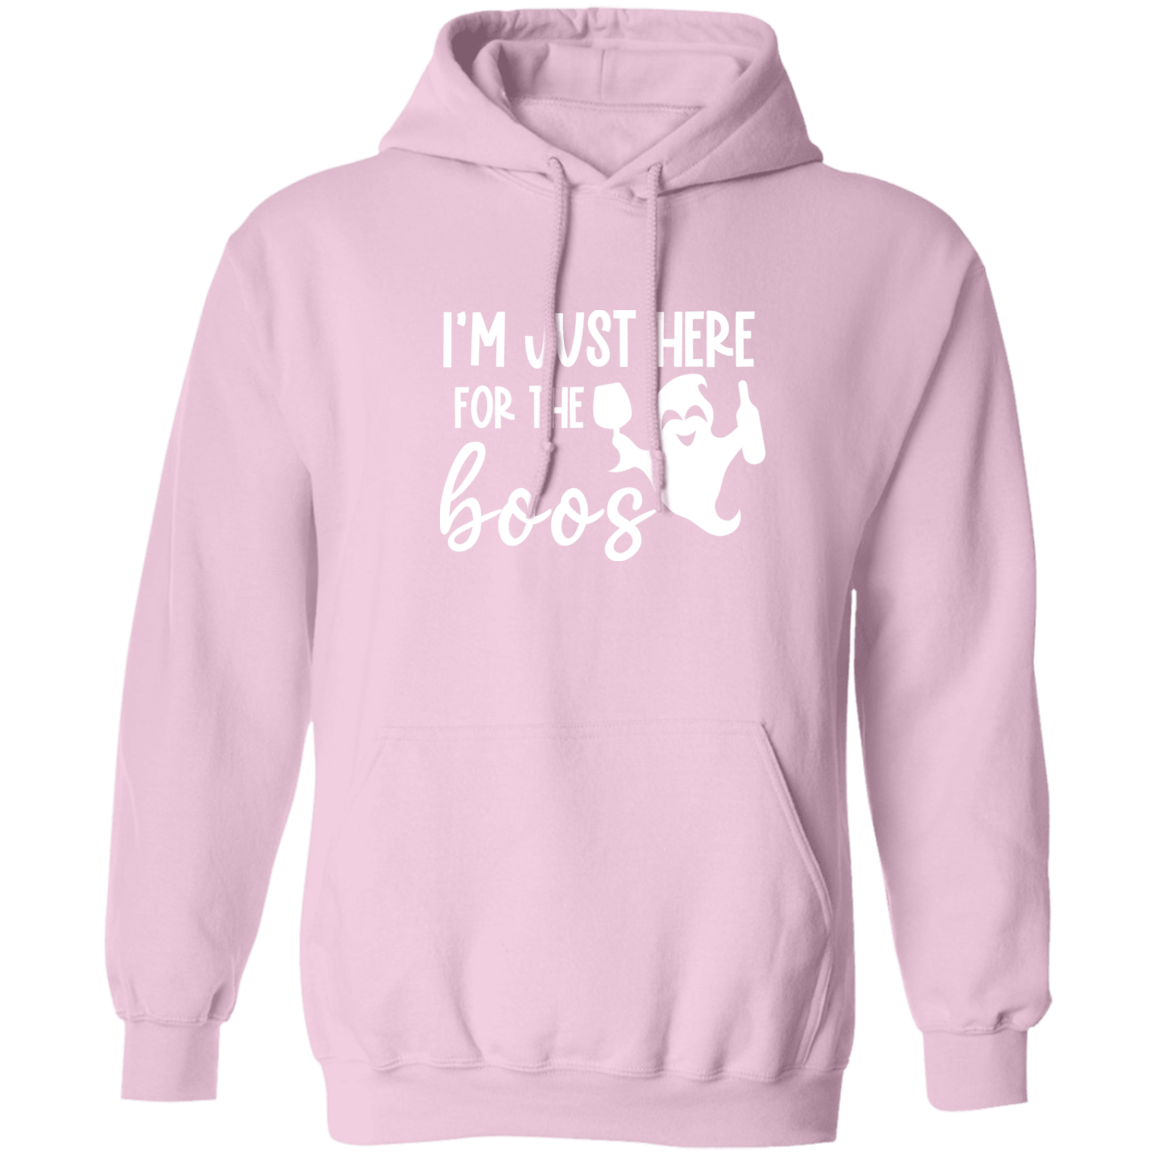 I'm Just Here for the Boos Unisex Pullover Hoodie